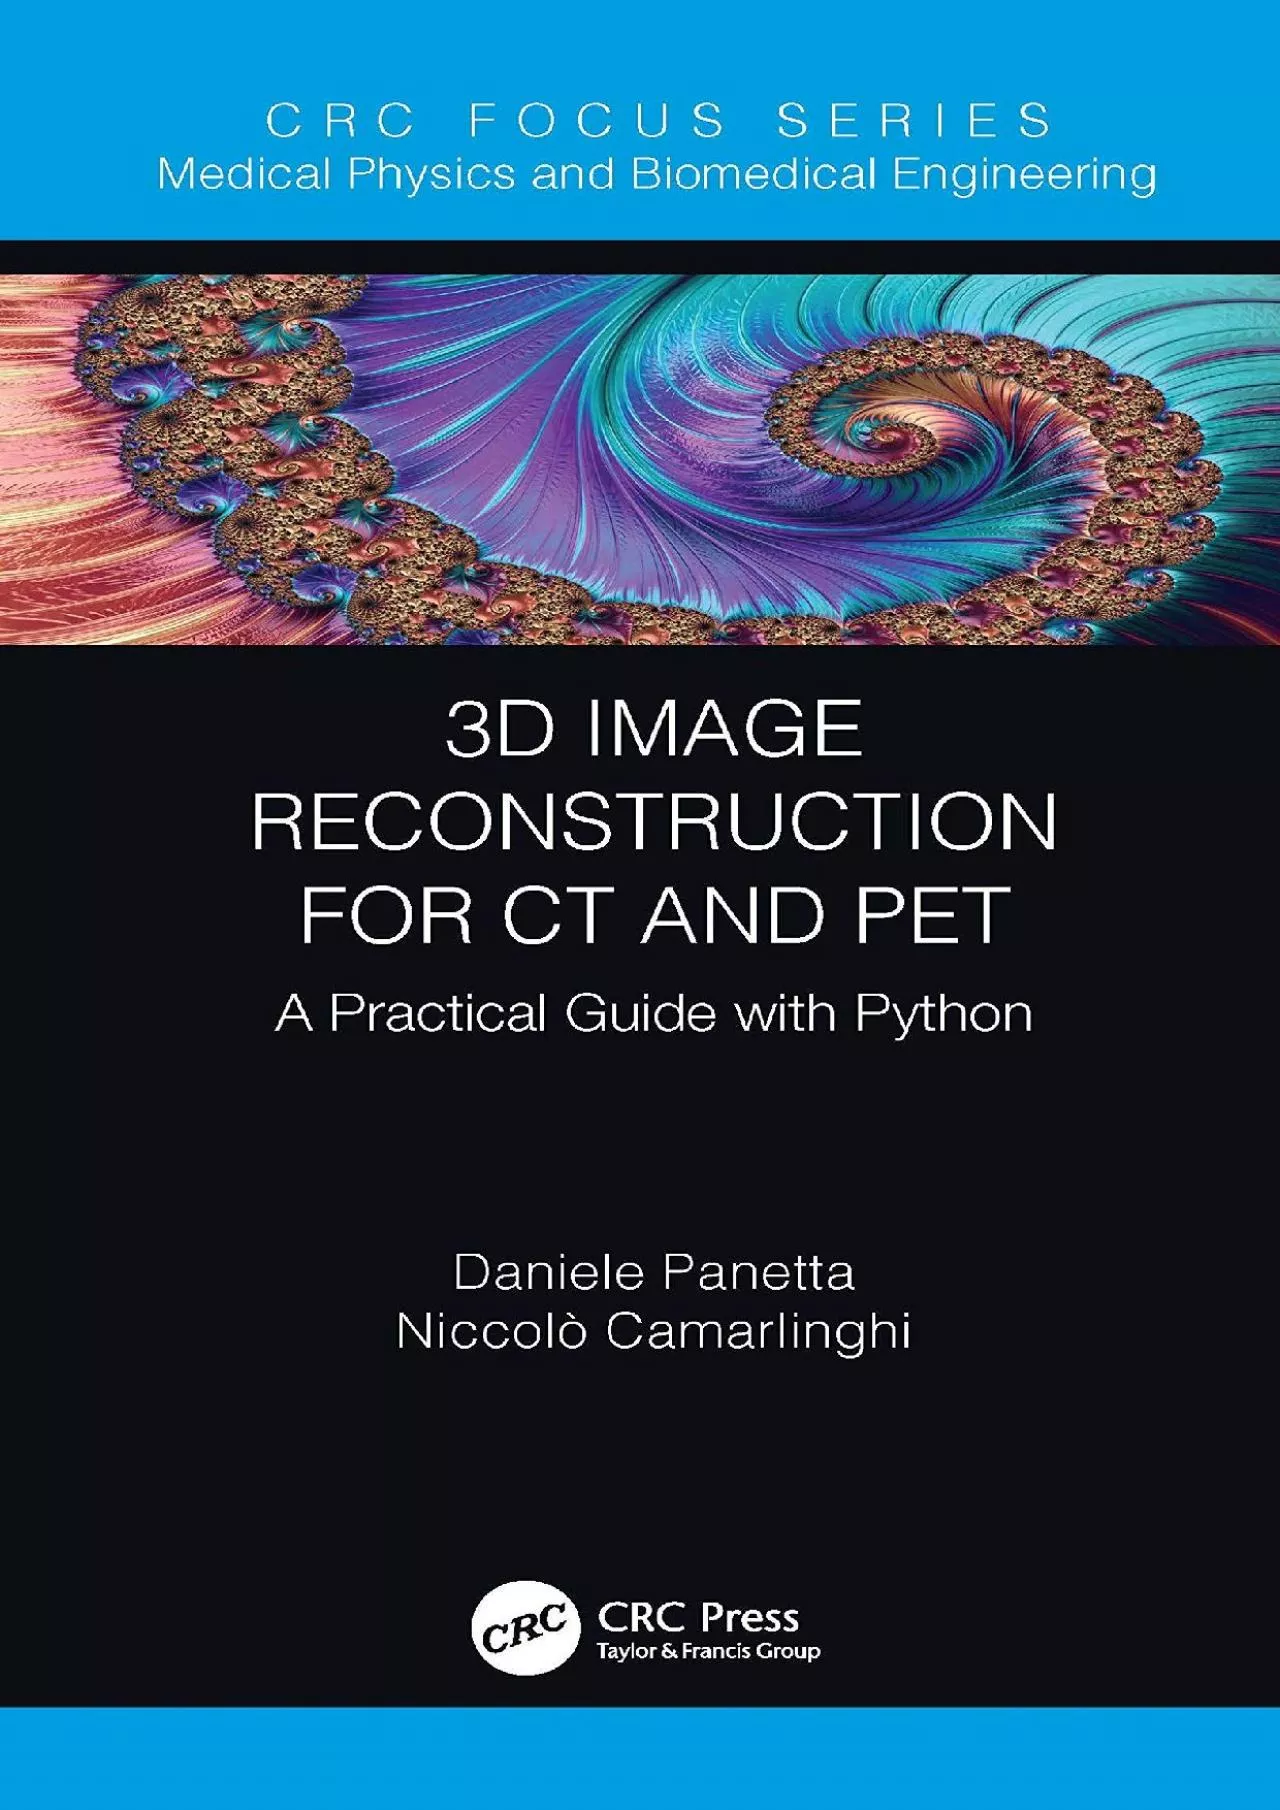 [FREE]-3D Image Reconstruction for CT and PET A Practical Guide with Python (Focus Series